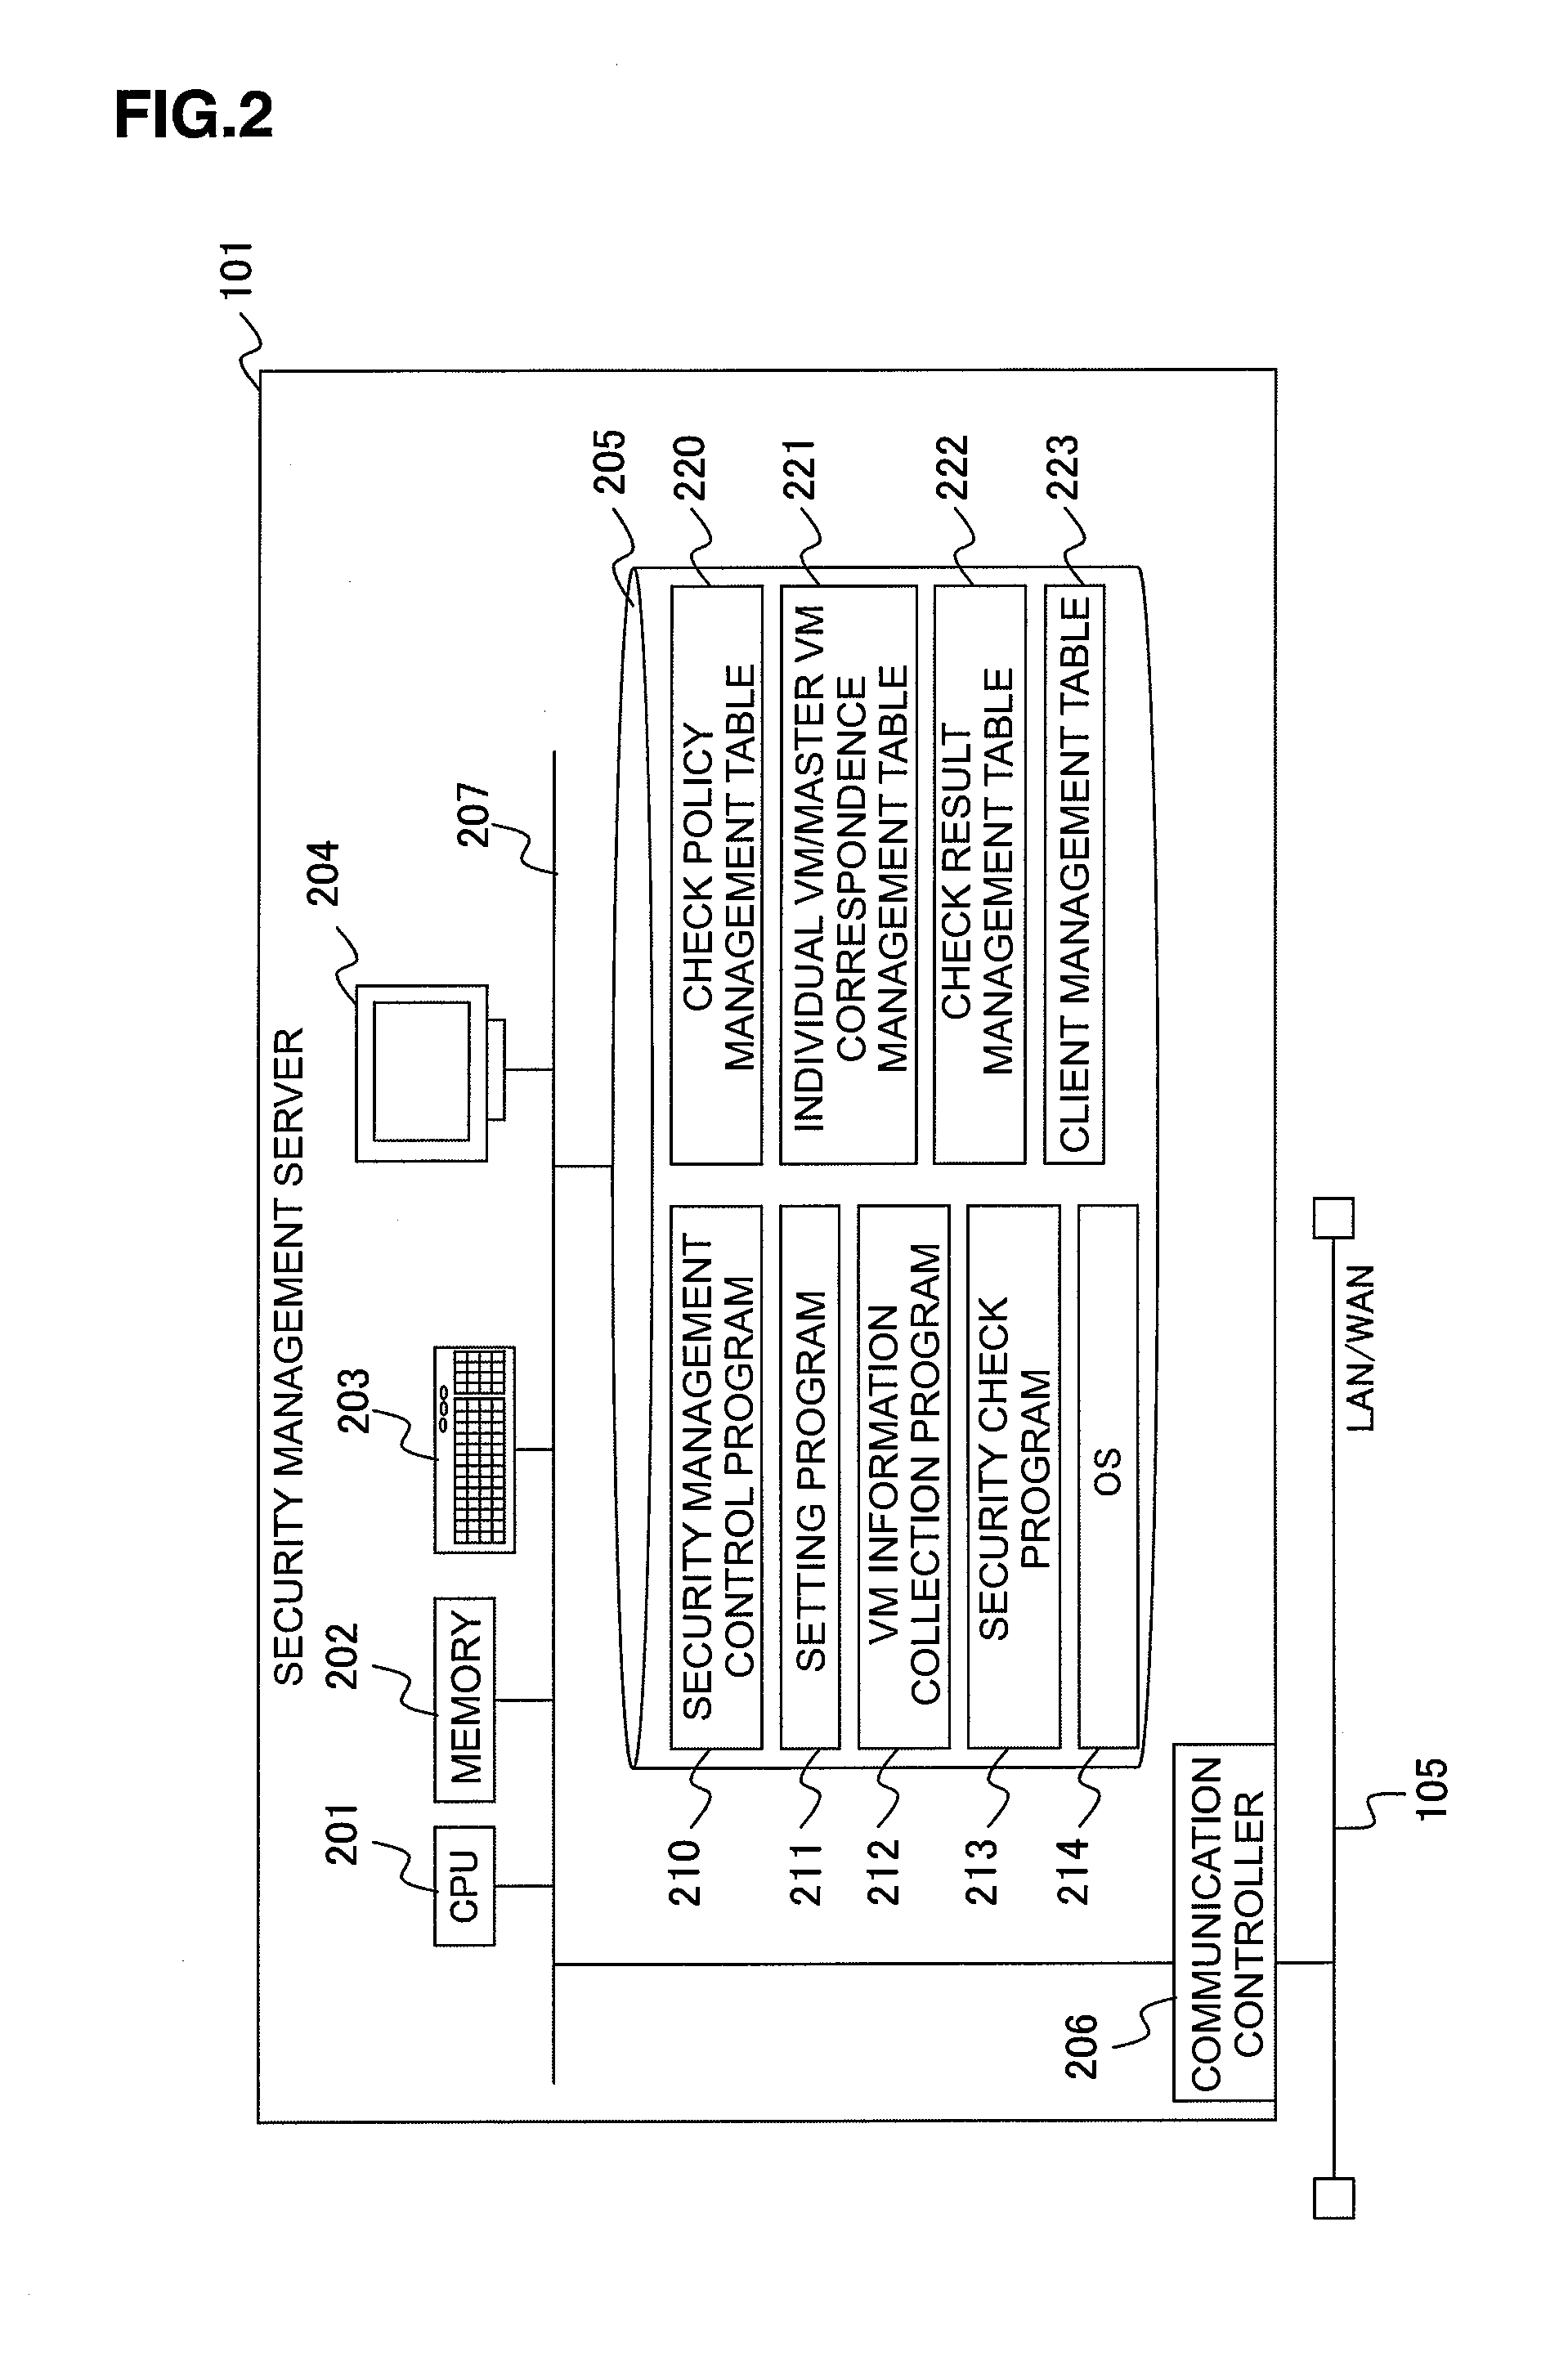 Security management device and method